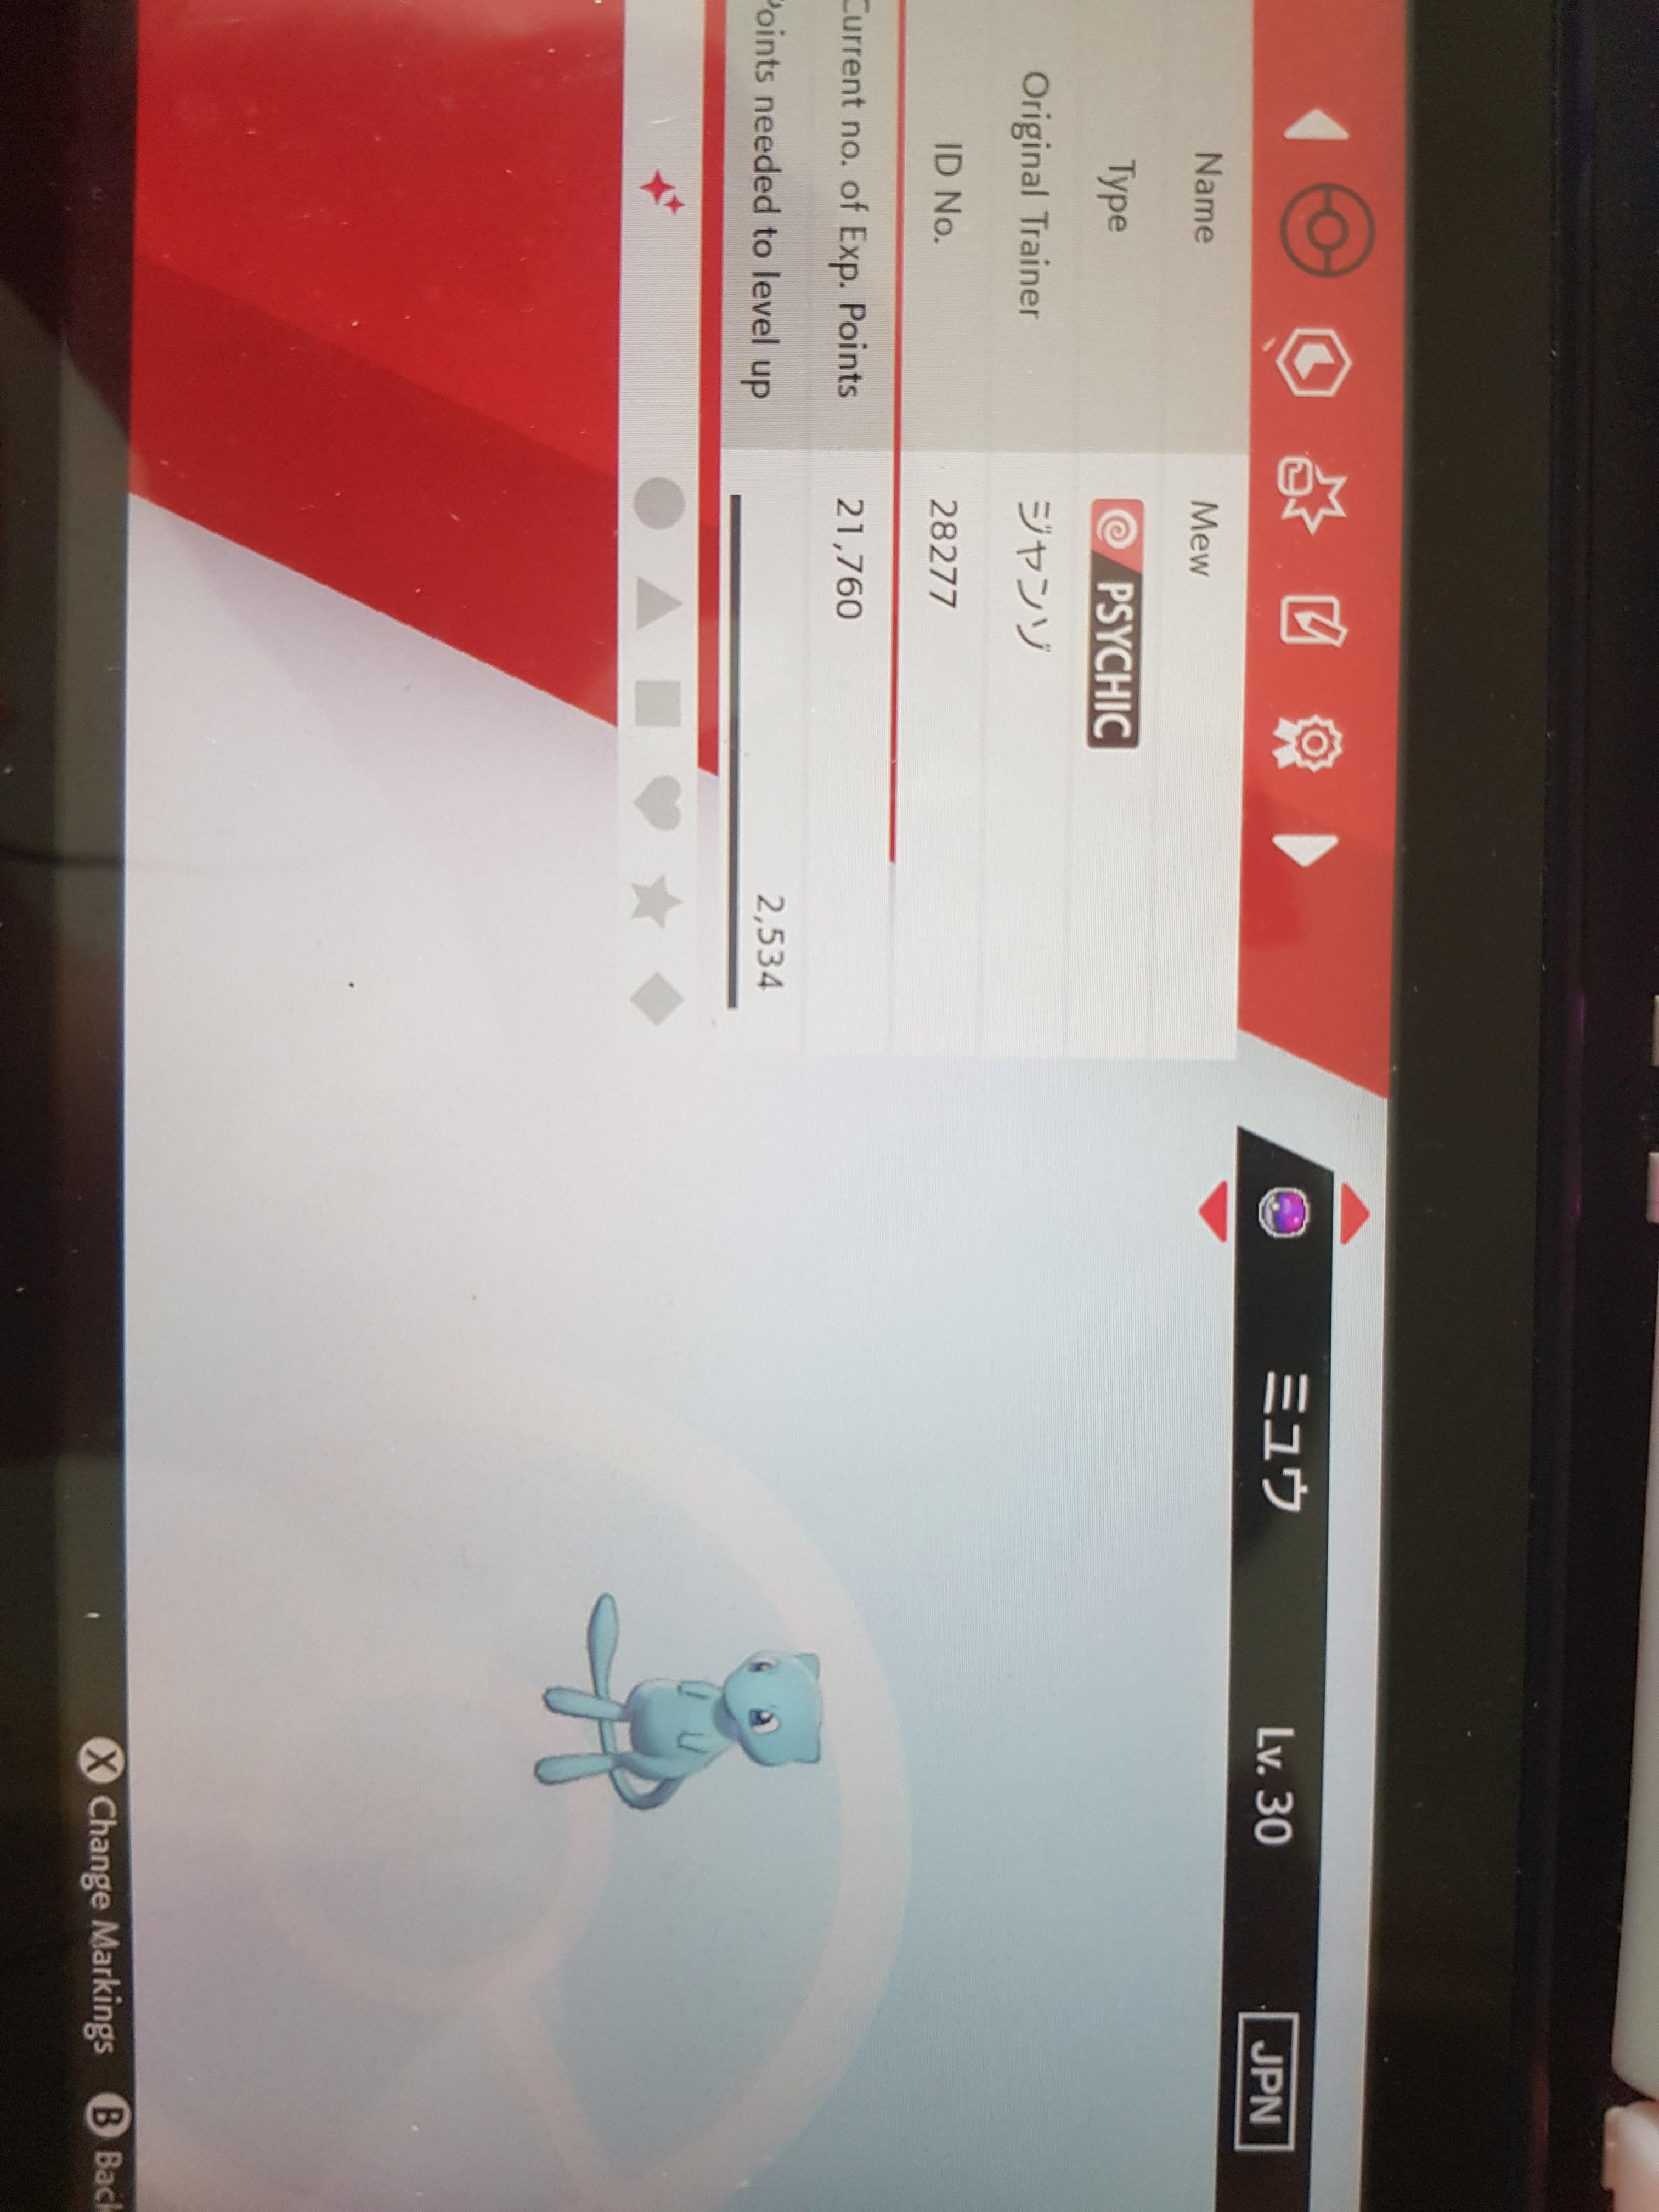 Shiny Lucario Shiny Mewtwo Pokemon Go Account Level 40, Video Gaming,  Gaming Accessories, Game Gift Cards & Accounts on Carousell